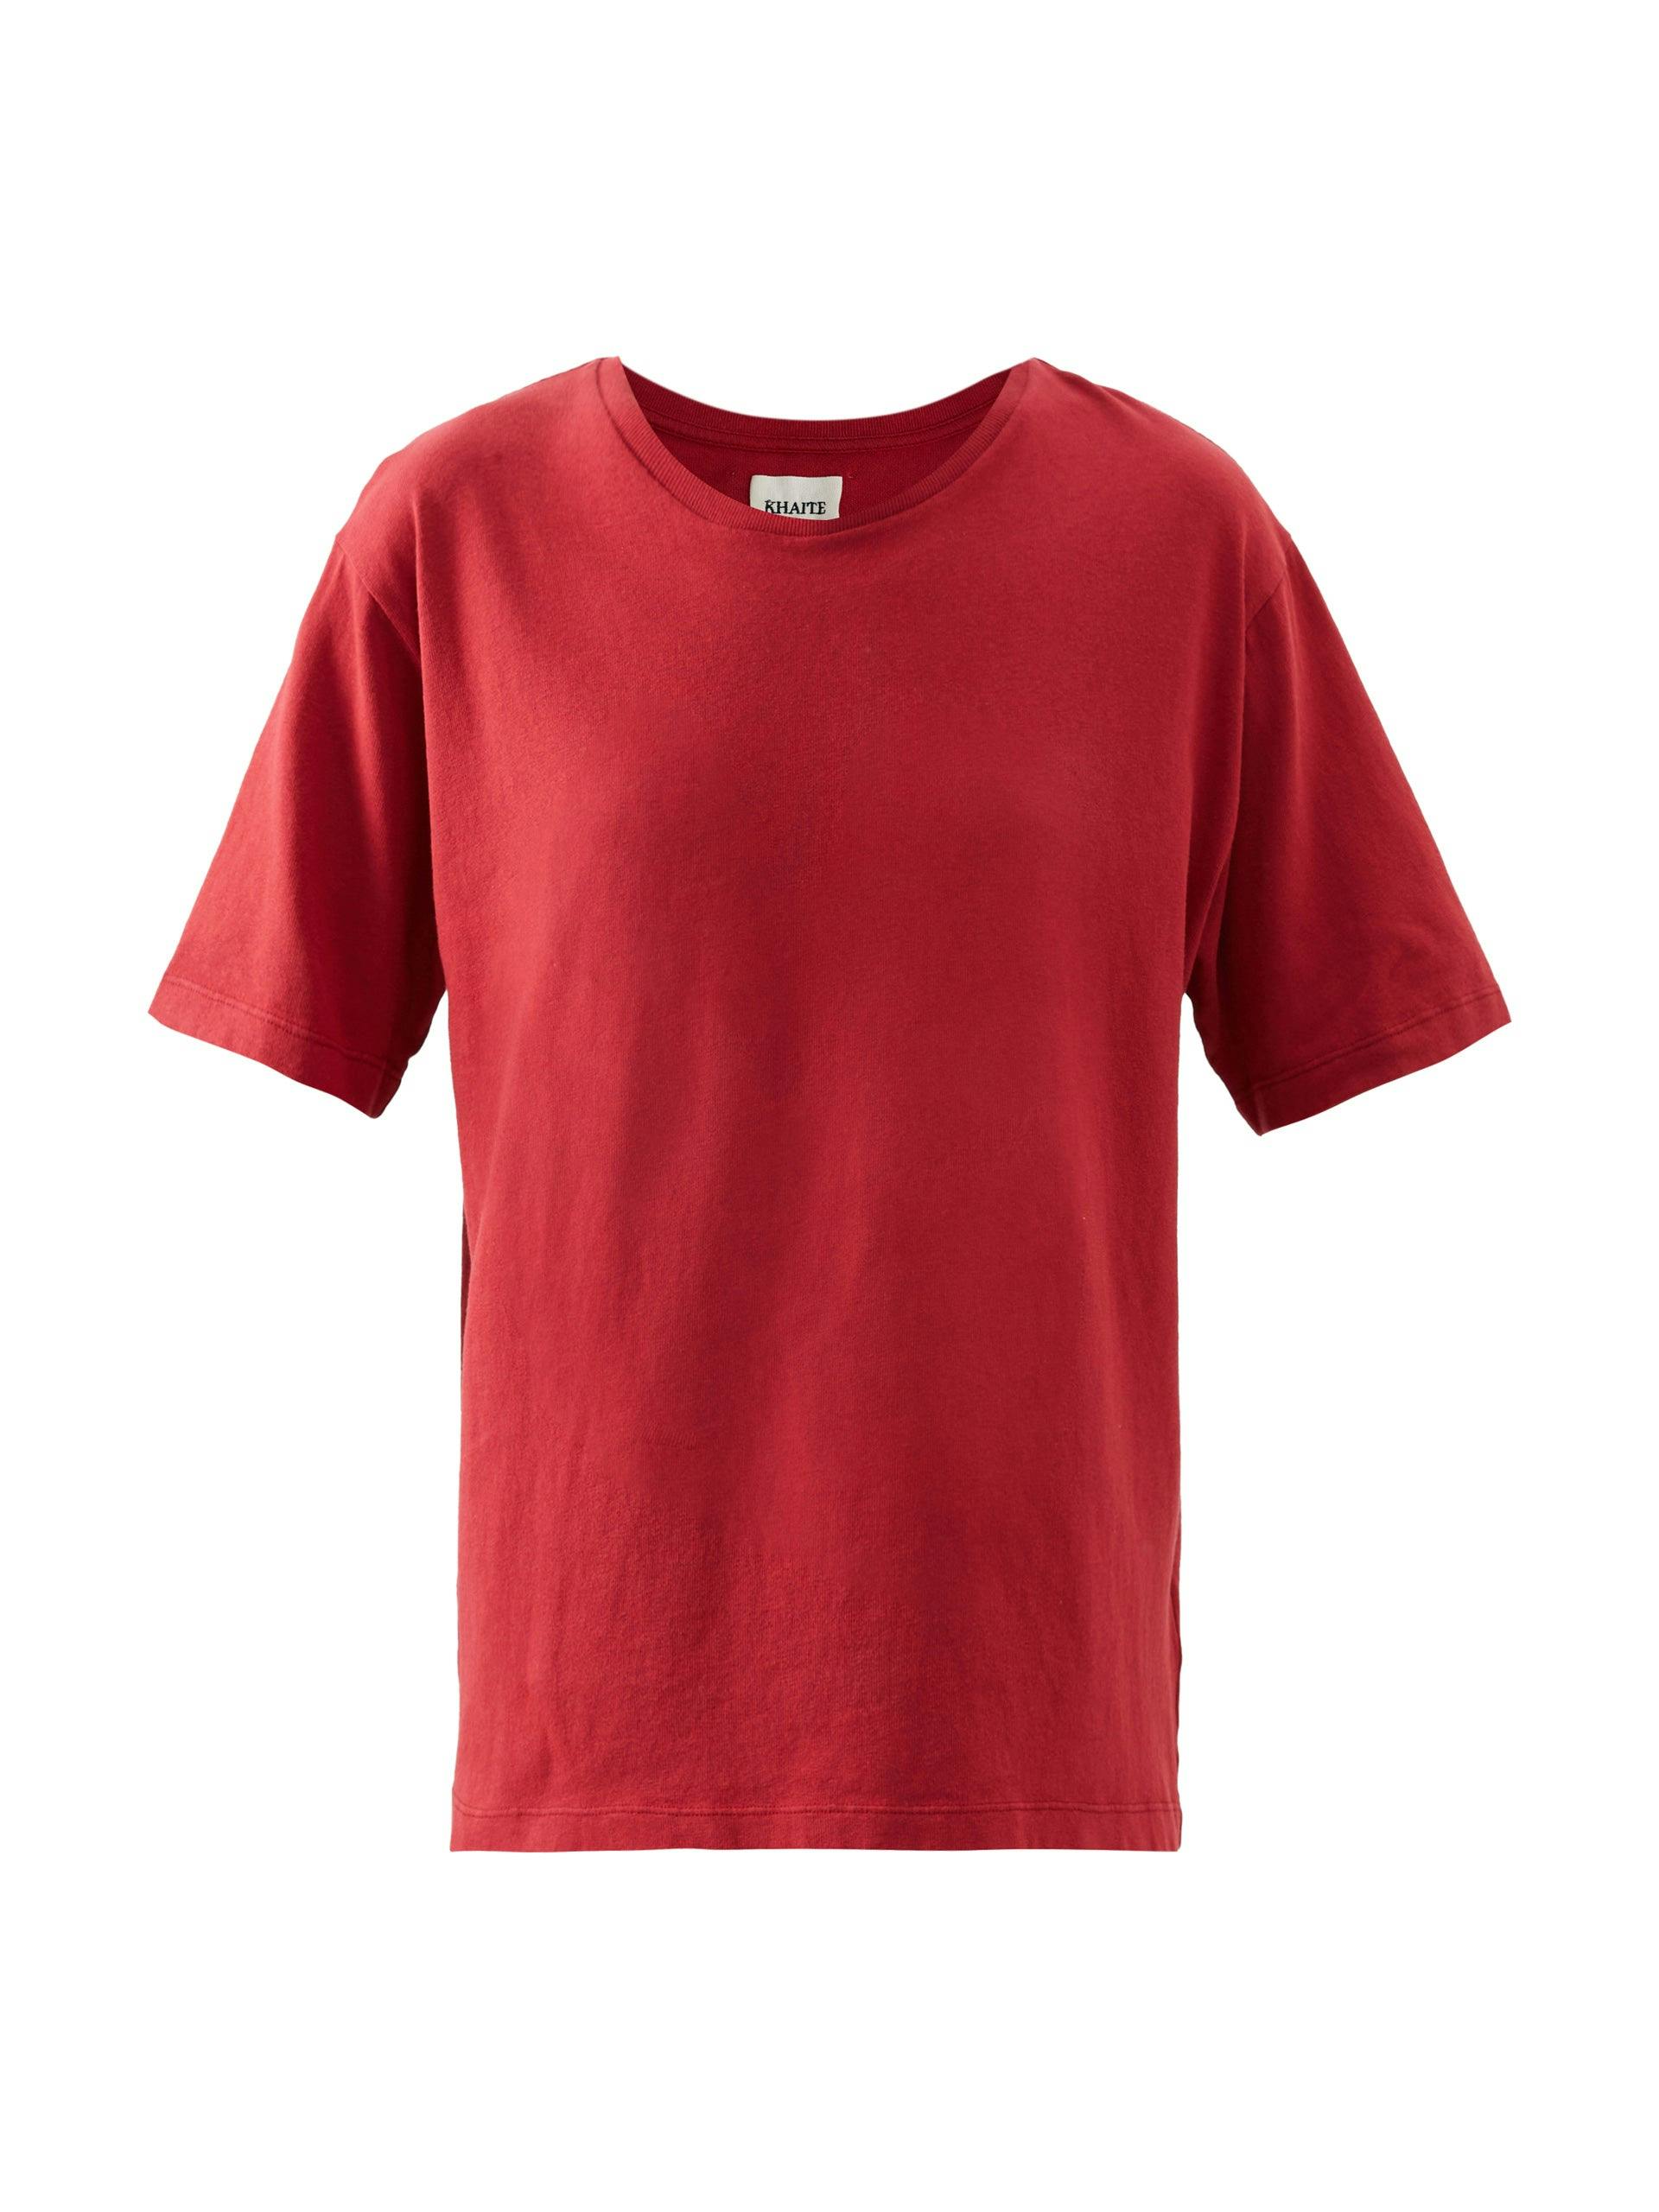 Red oversized t-shirt